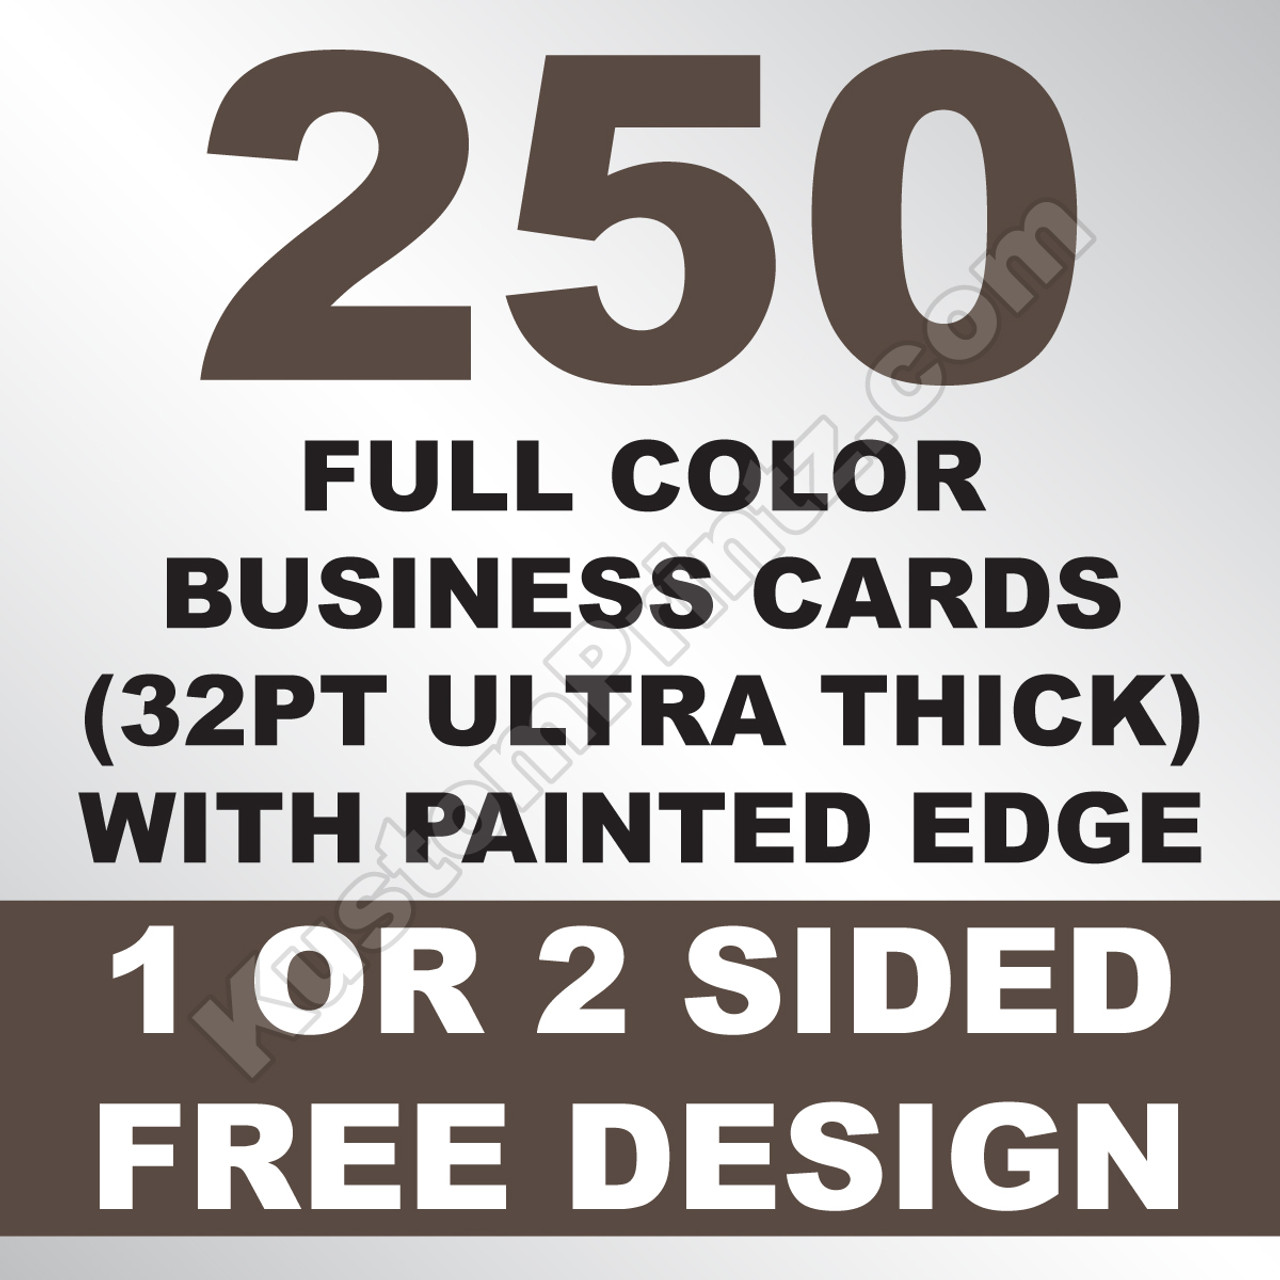 250 Business Cards (32PT Ultra Thick)